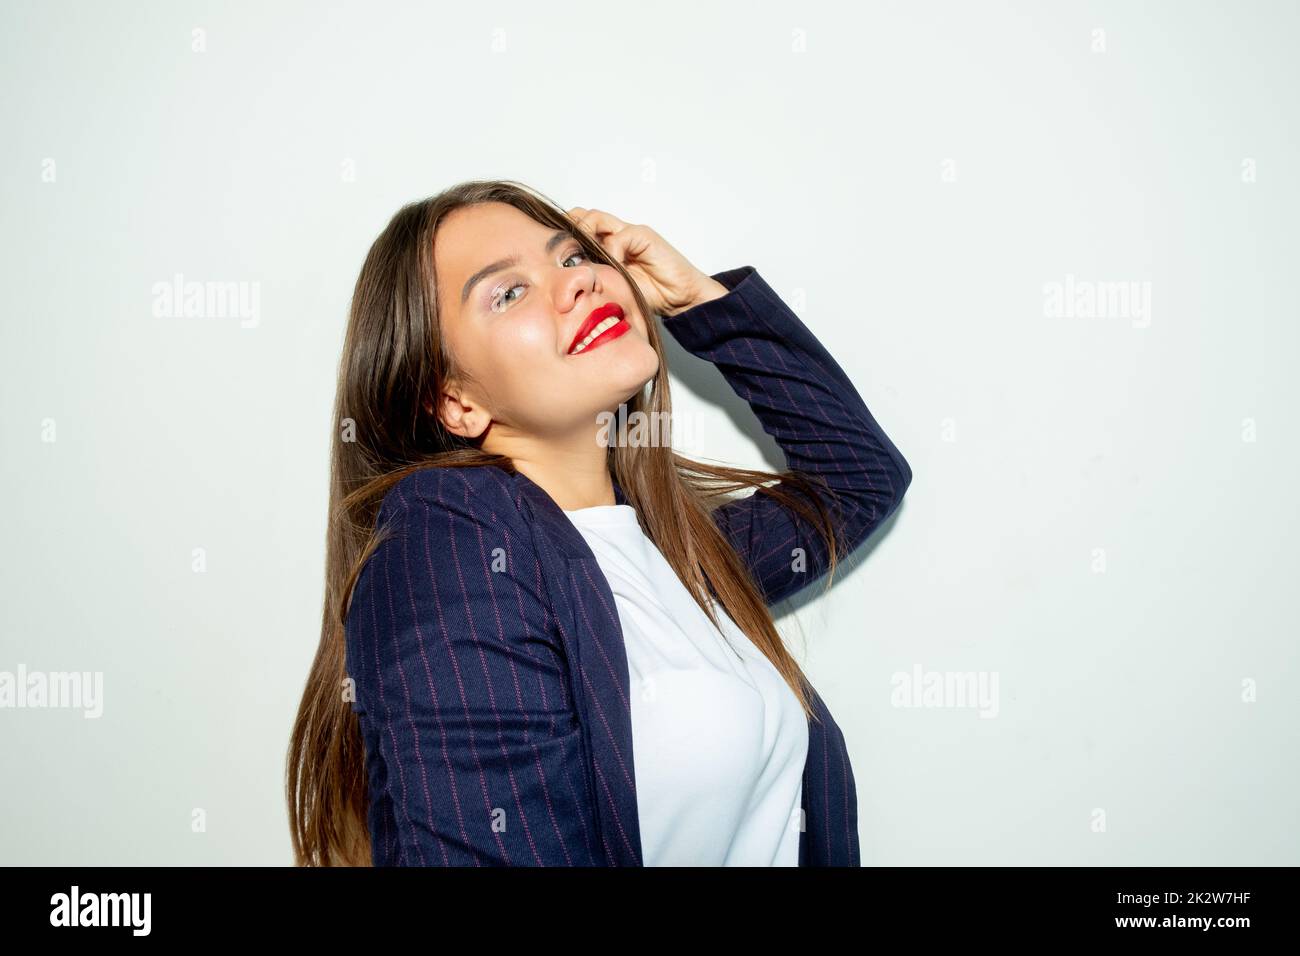 Happy business woman. Carefree lifestyle. Individuality confidence. Portrait of cheerful lady posing looking at camera smiling isolated on light neutr Stock Photo